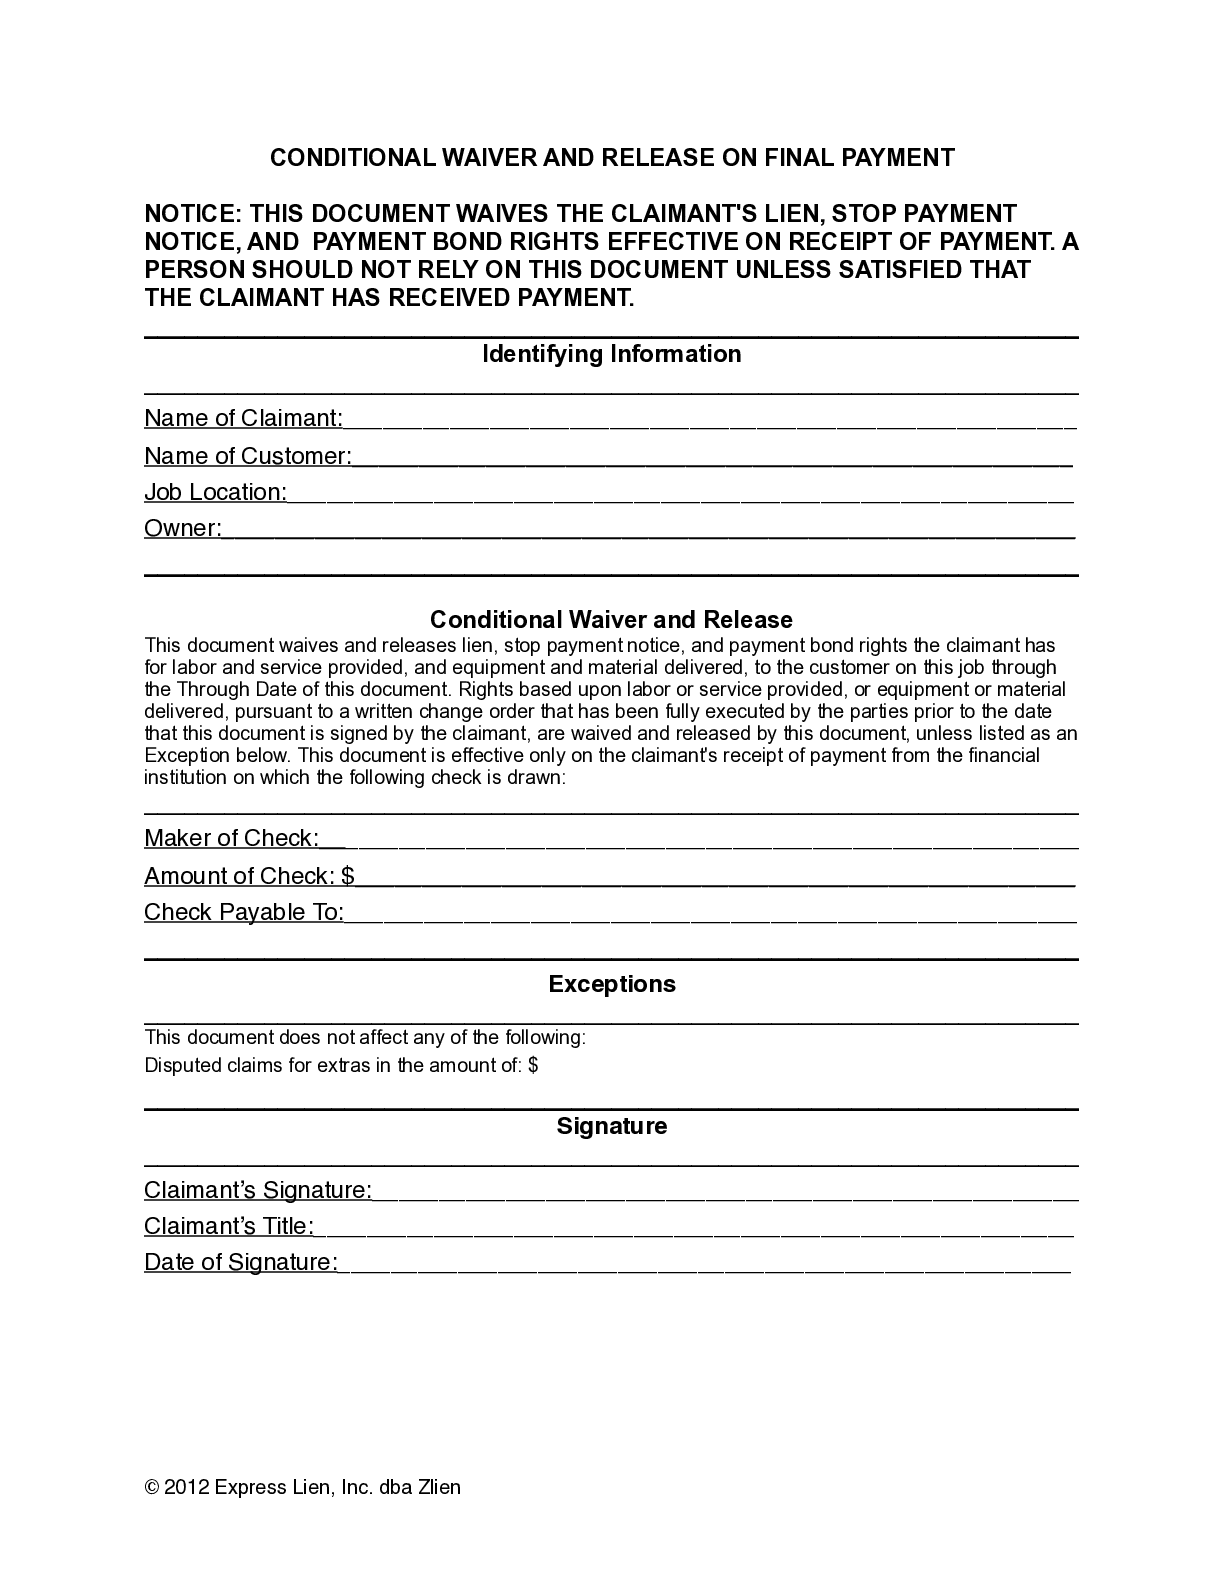 California Conditional Lien Waiver and Release On Final Payment Form - free from